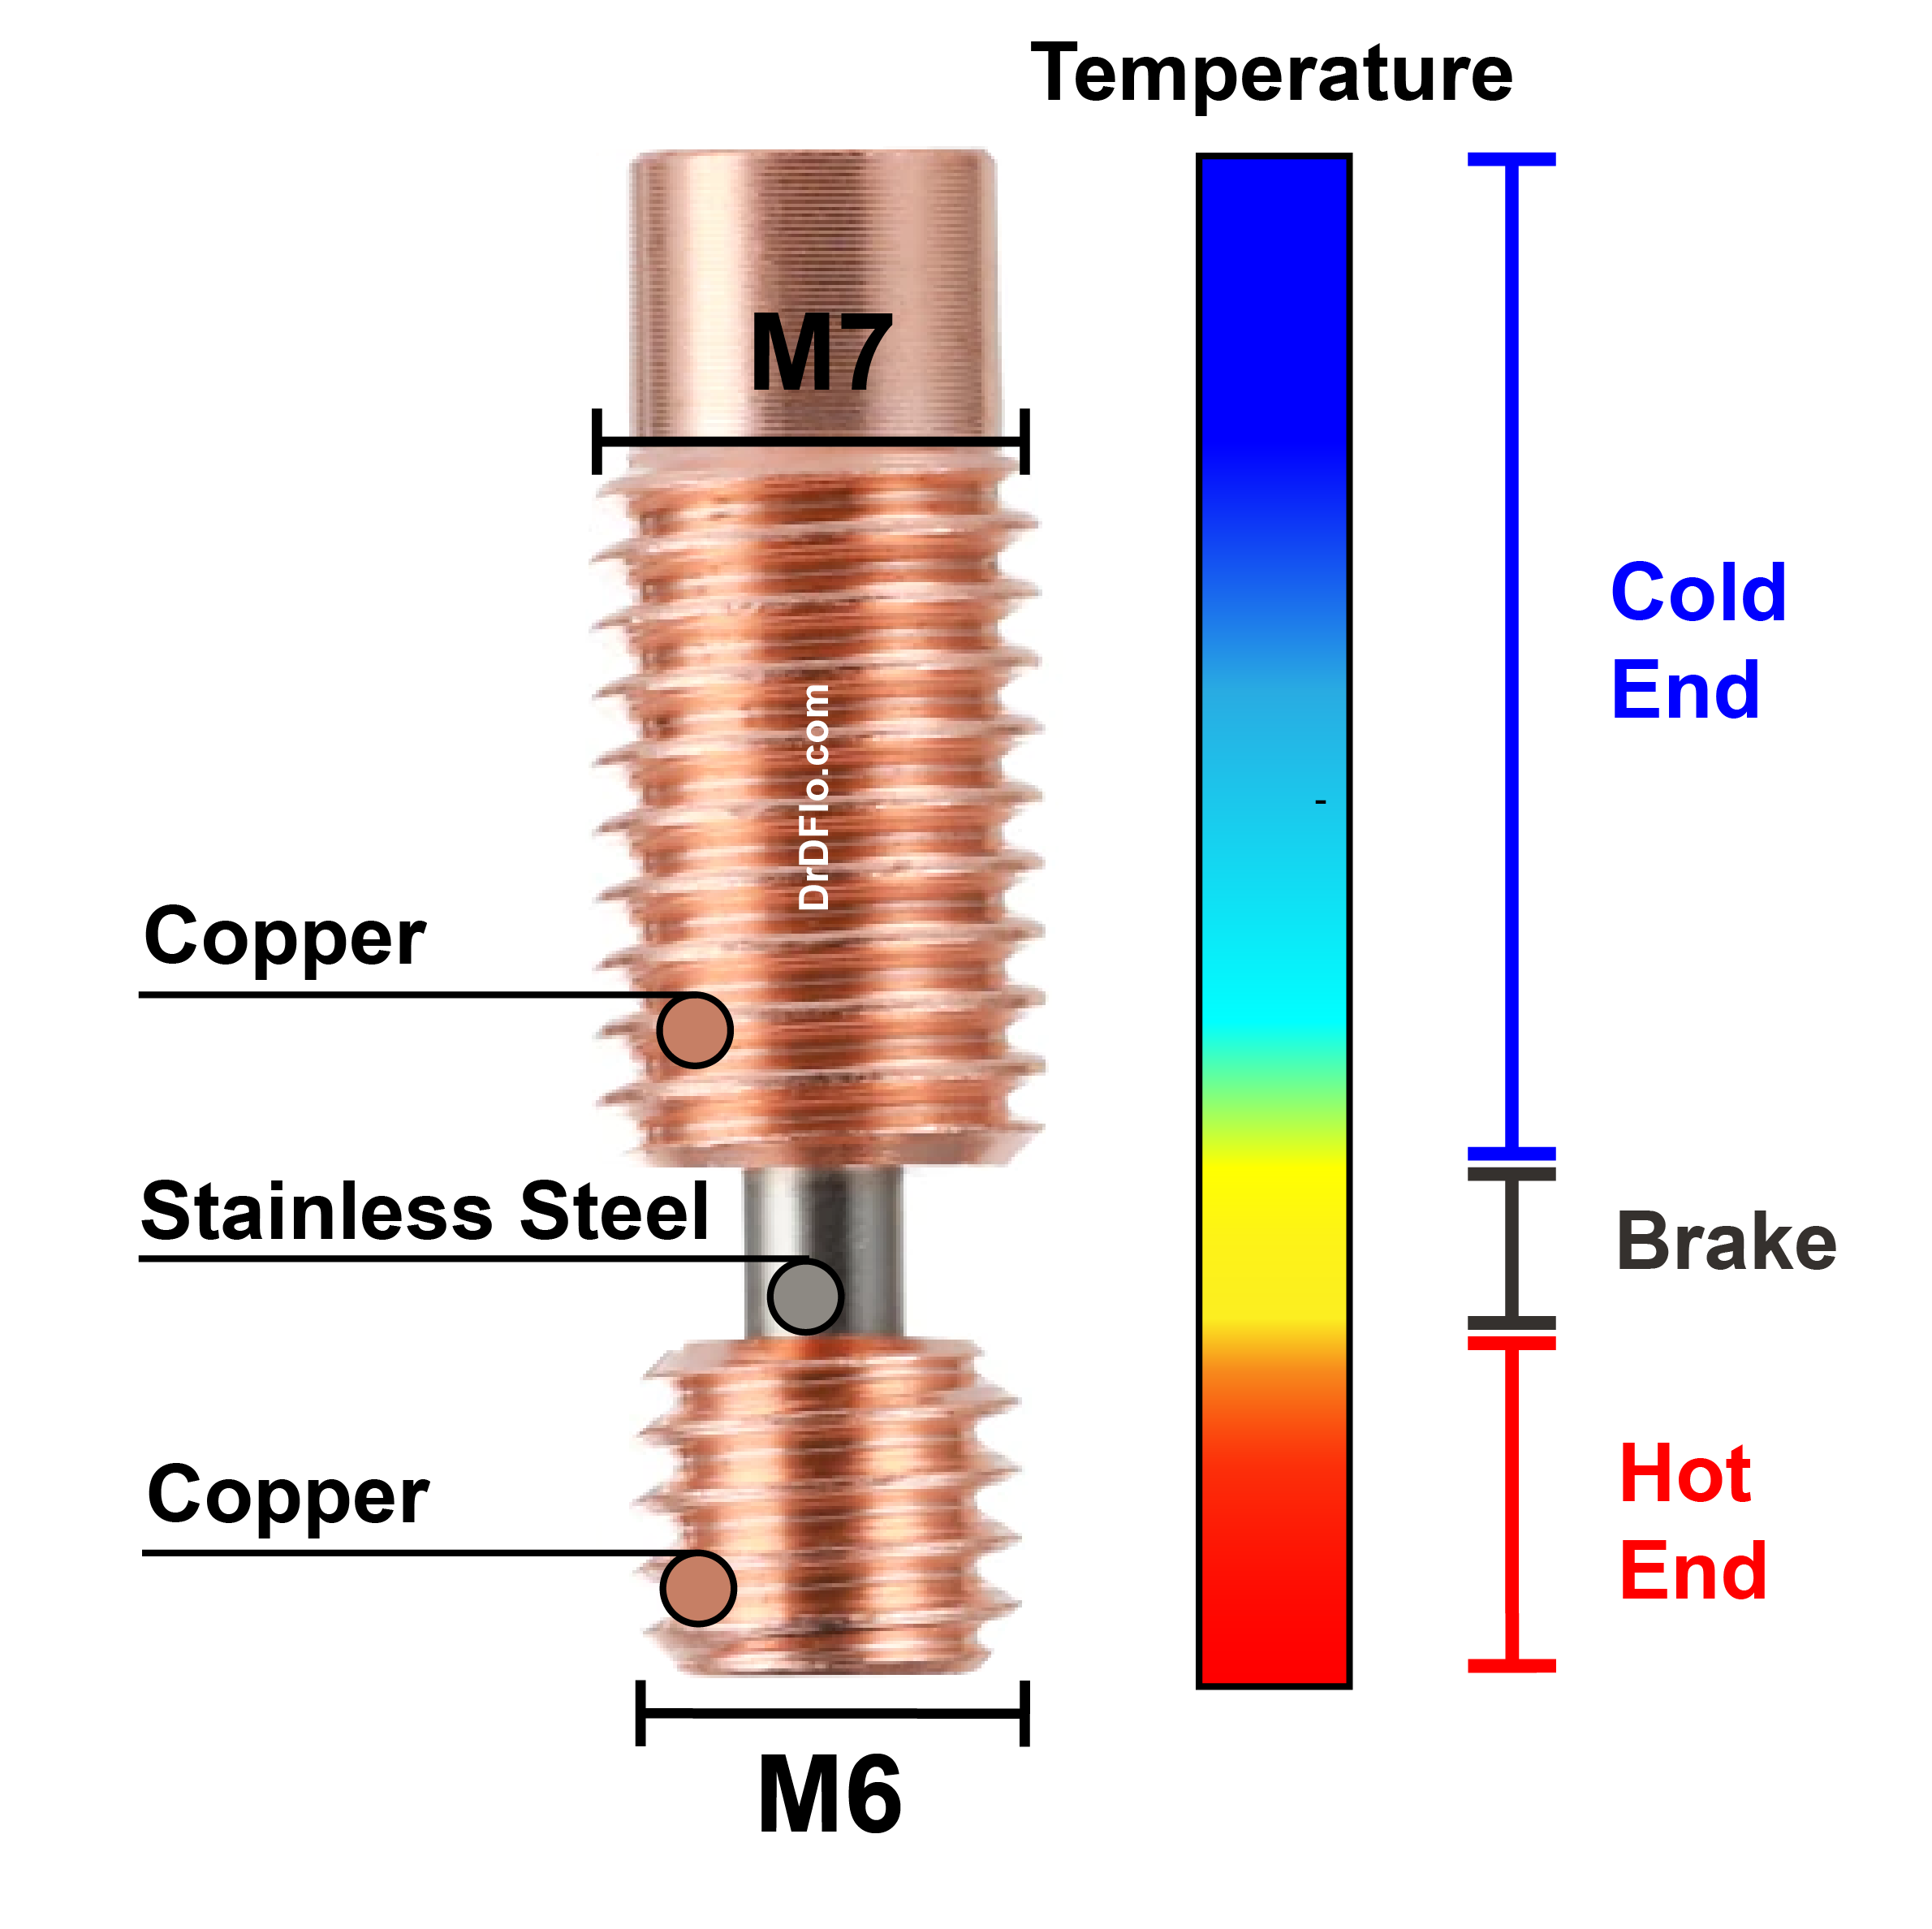 Temperature gradient for a bimetal 3D Printer heat brake (copper and stainless steel).